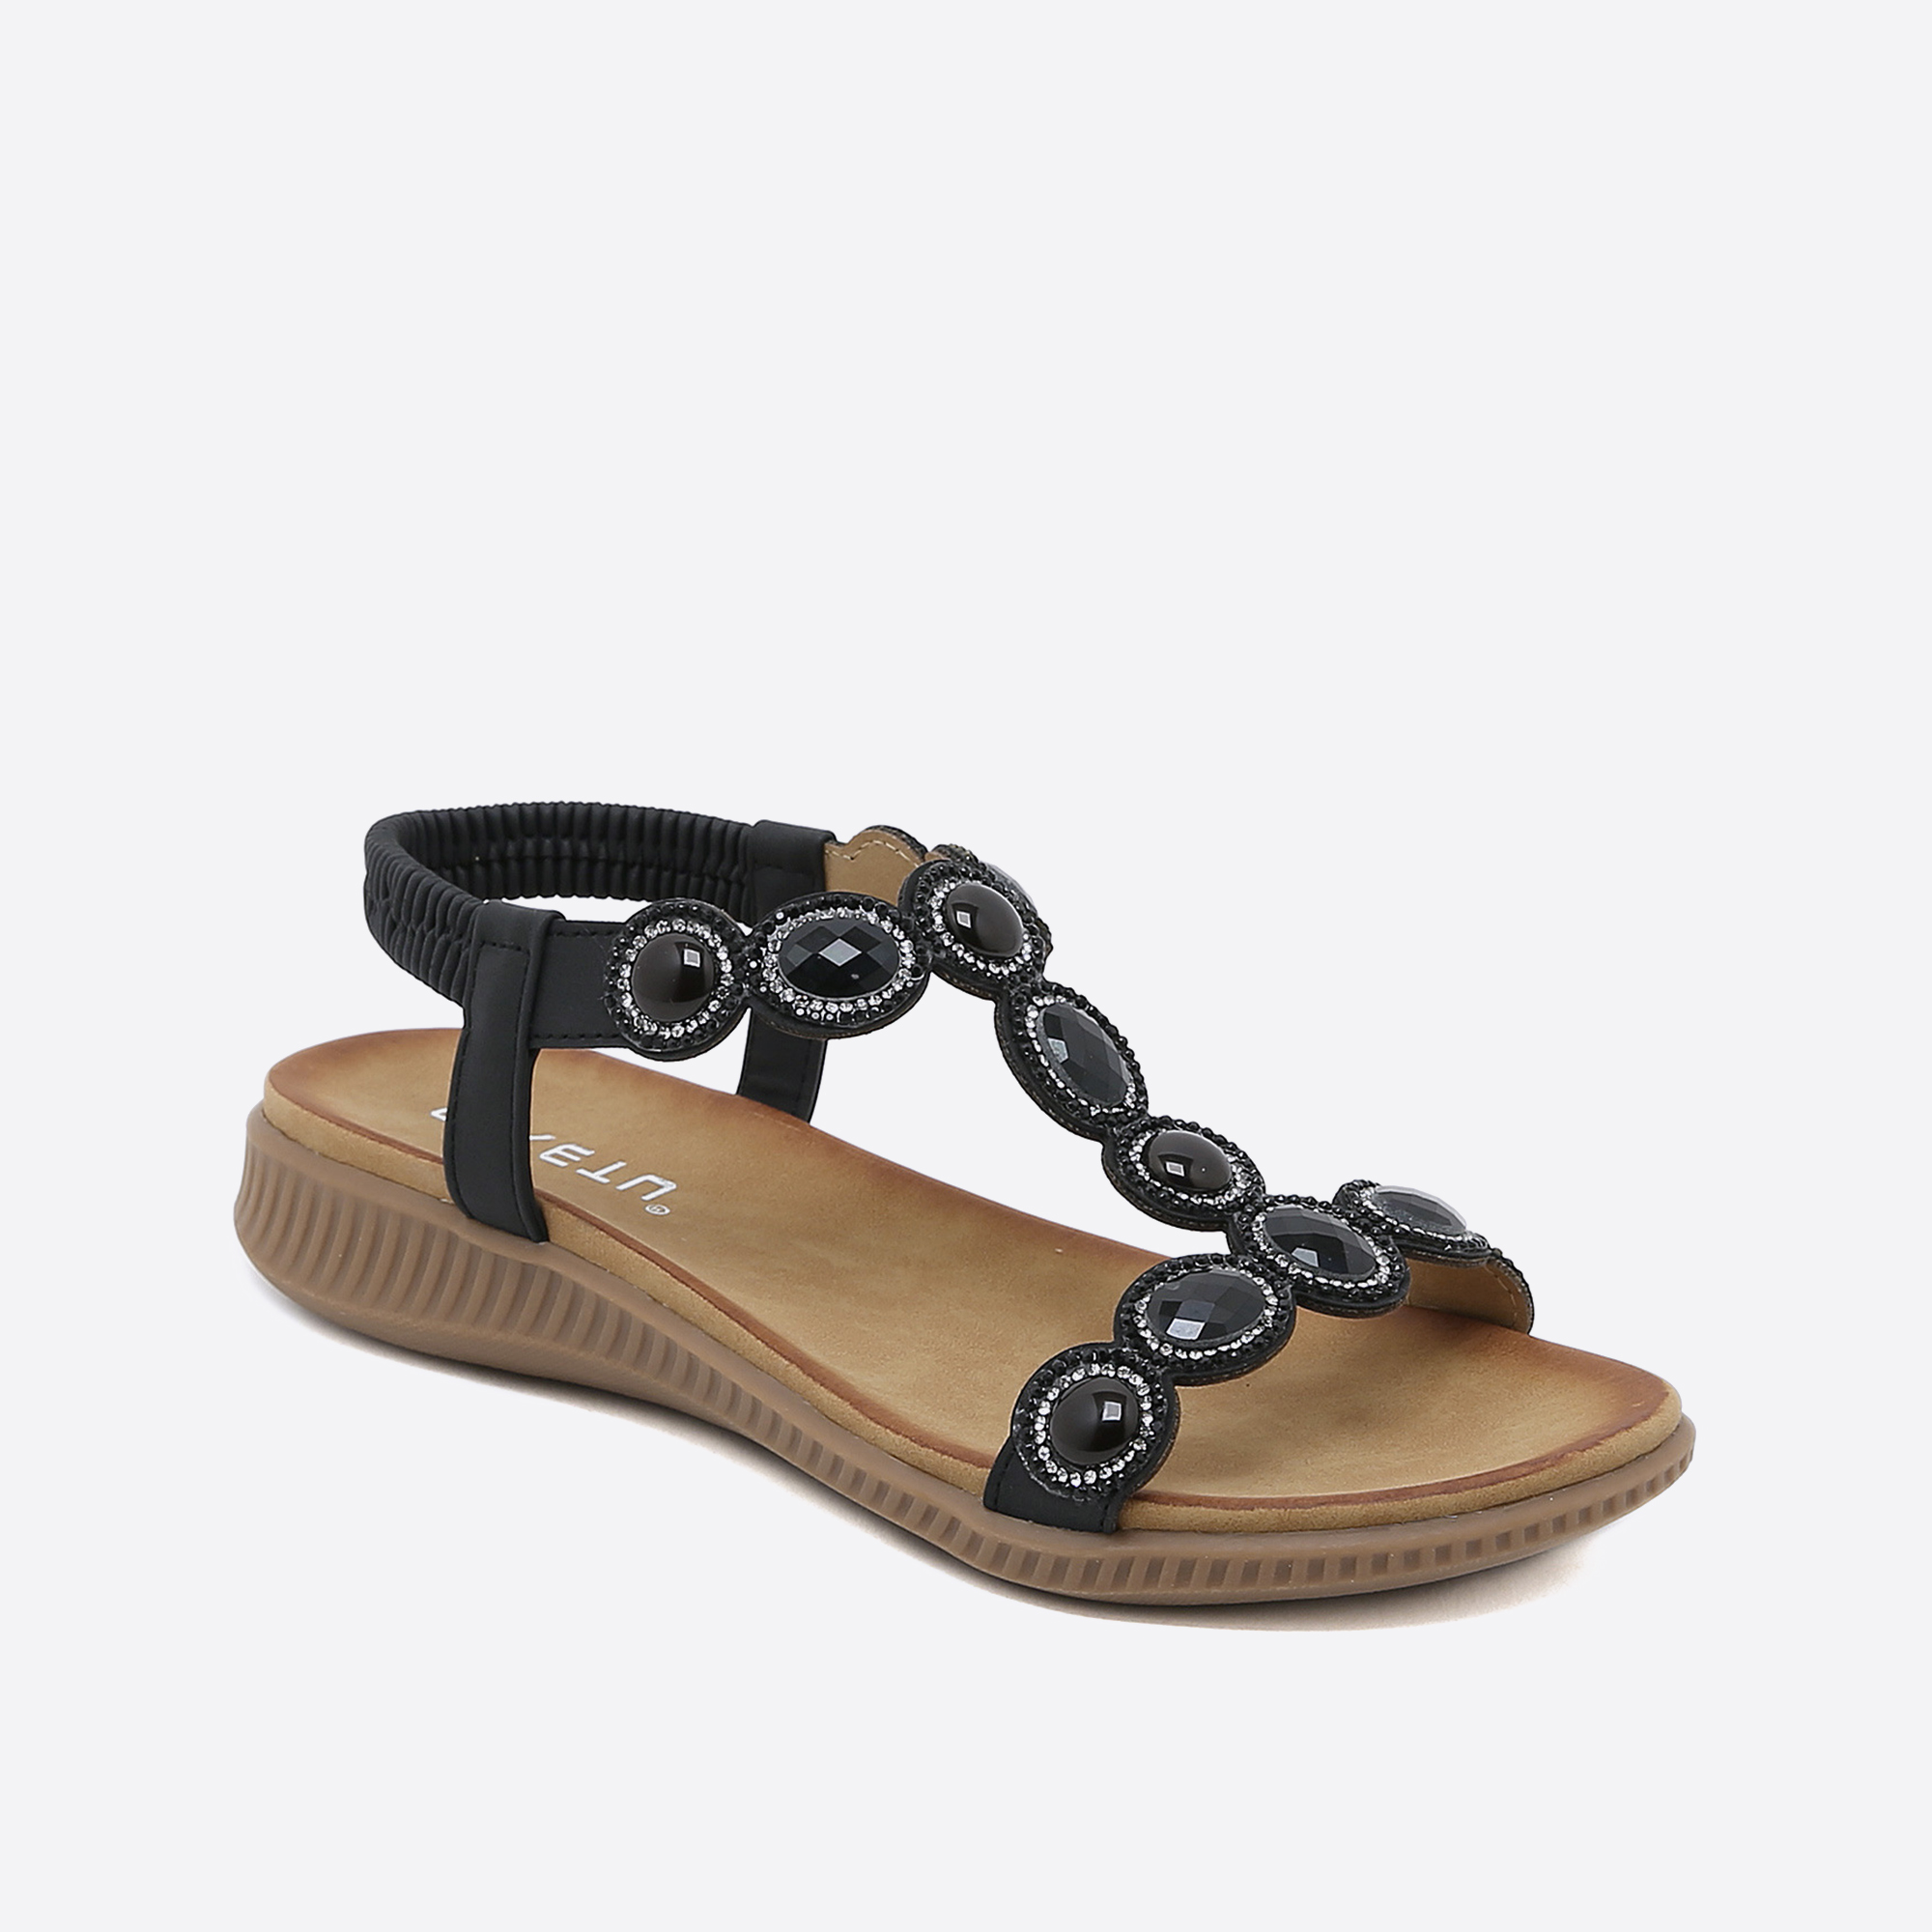 Vintage Vacation & Party Women Sandals